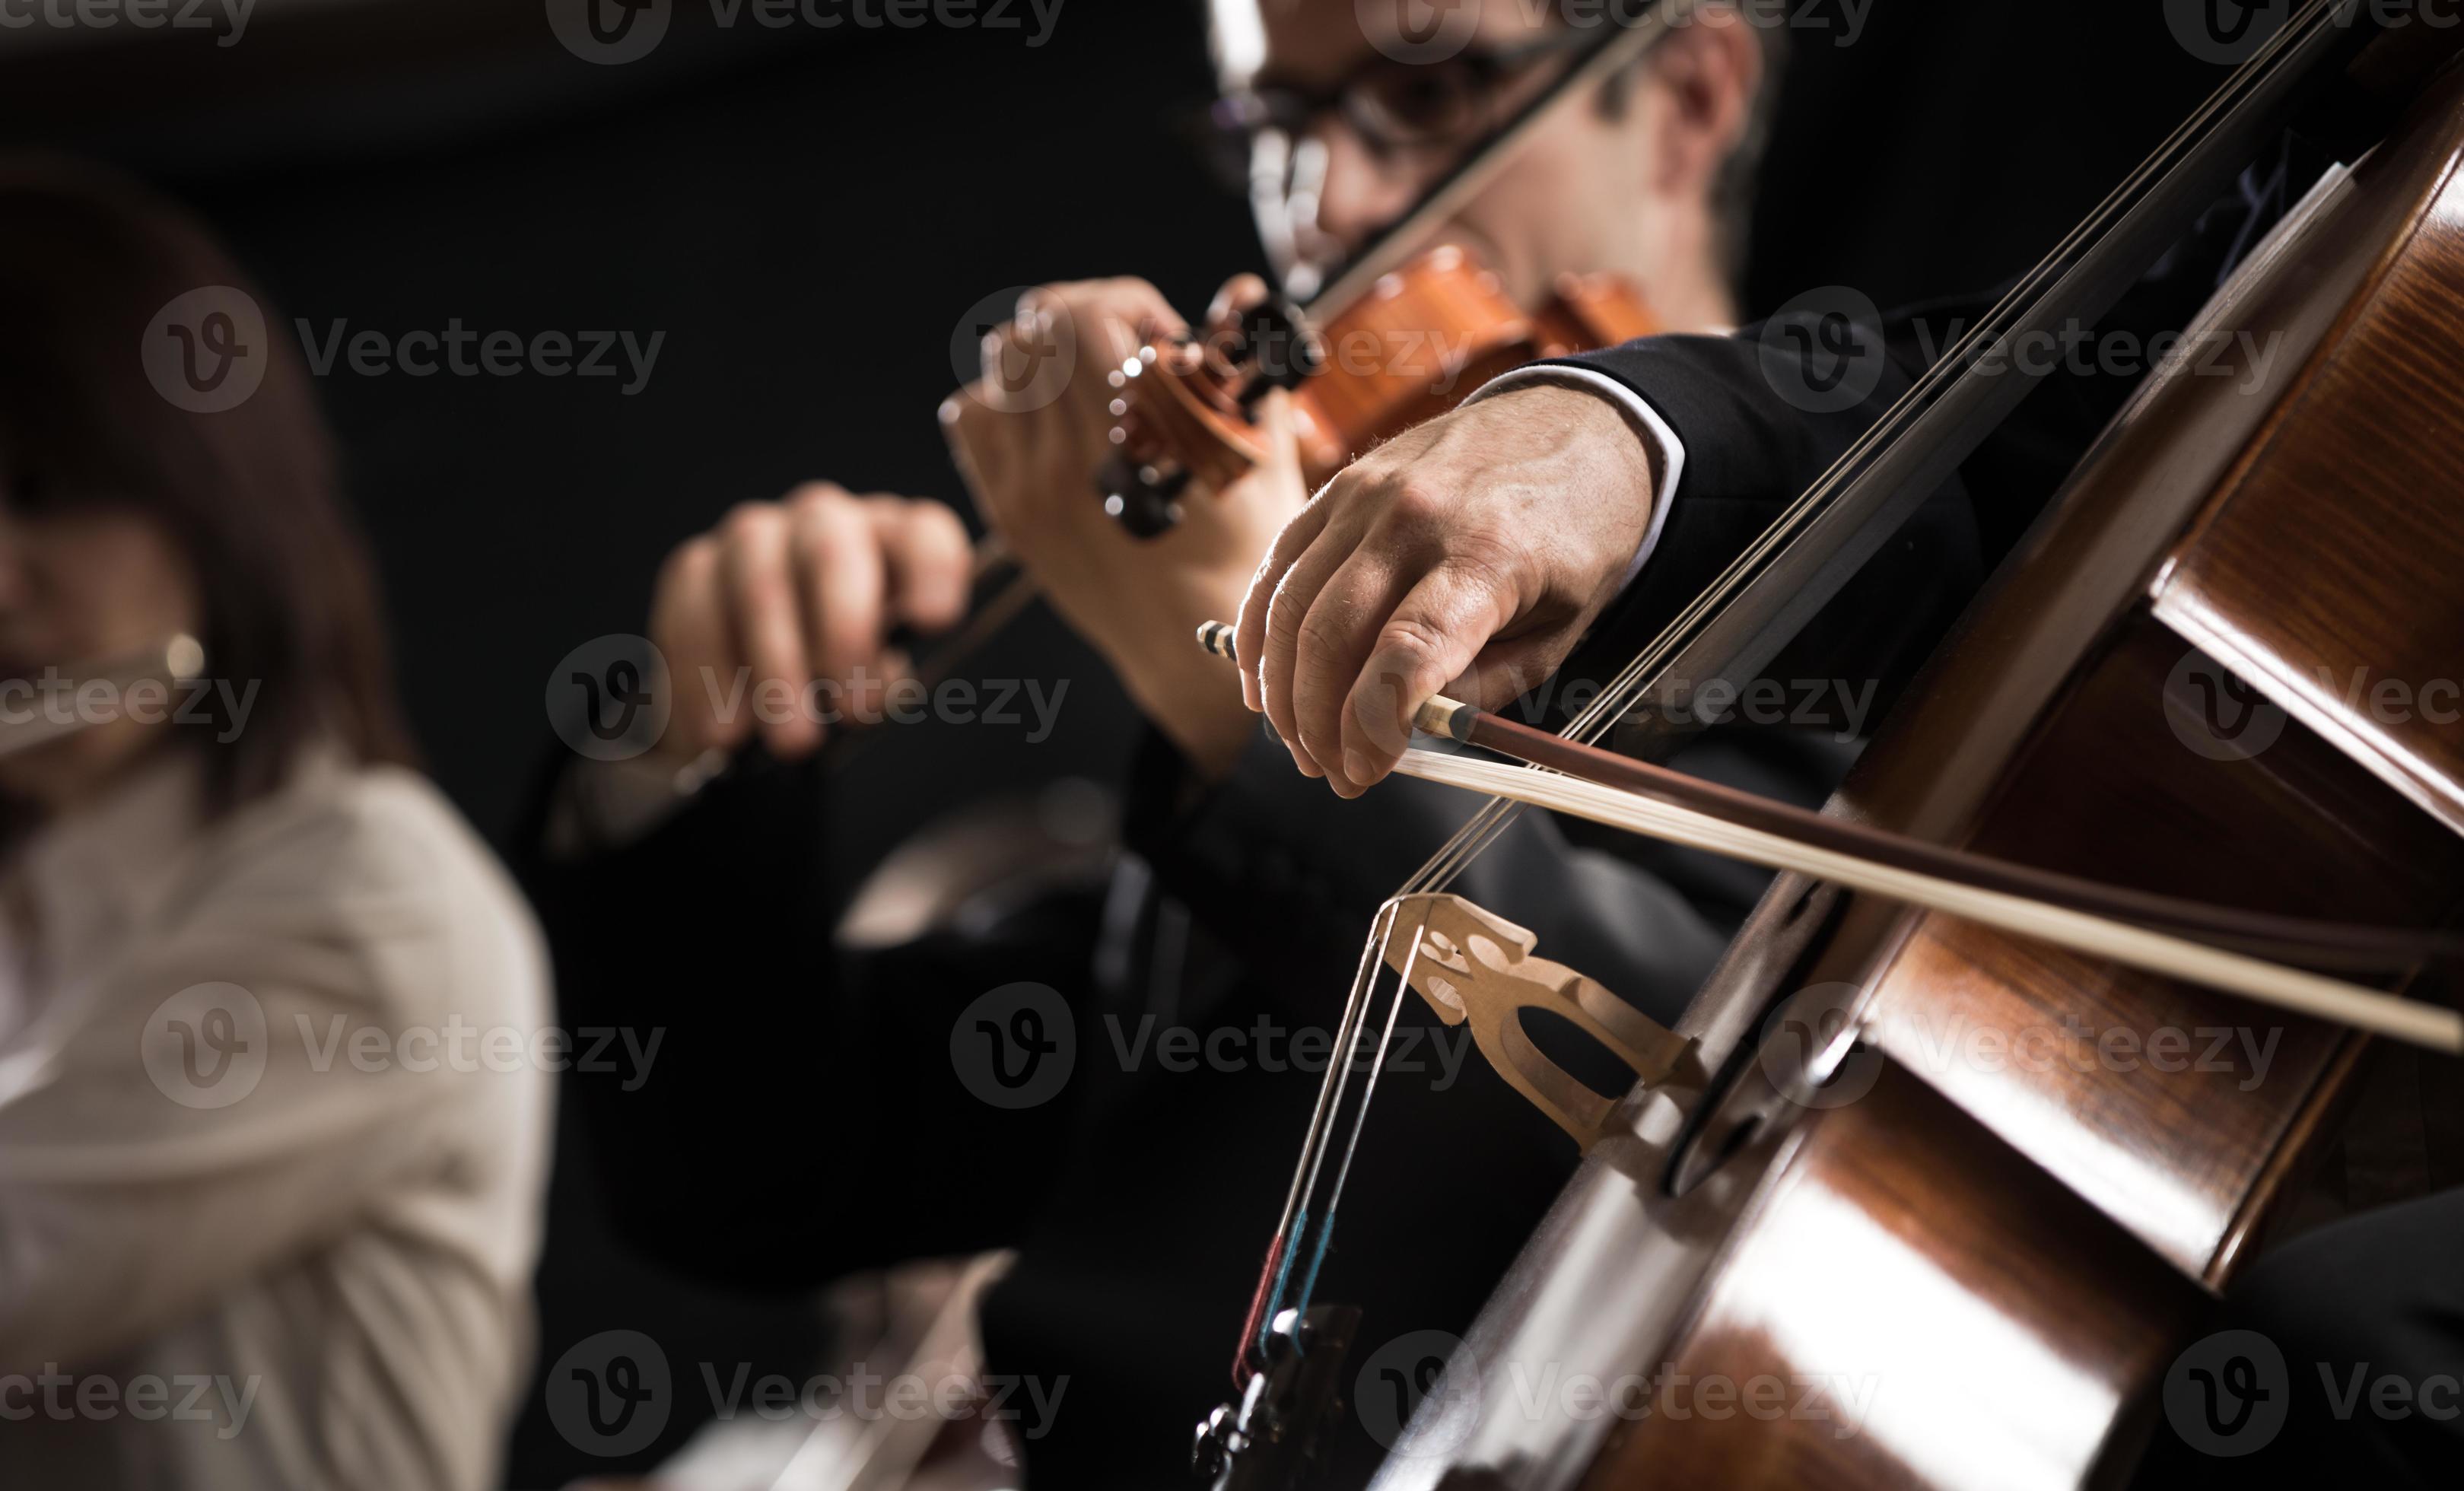 Symphony orchestra: cello player close-up photo